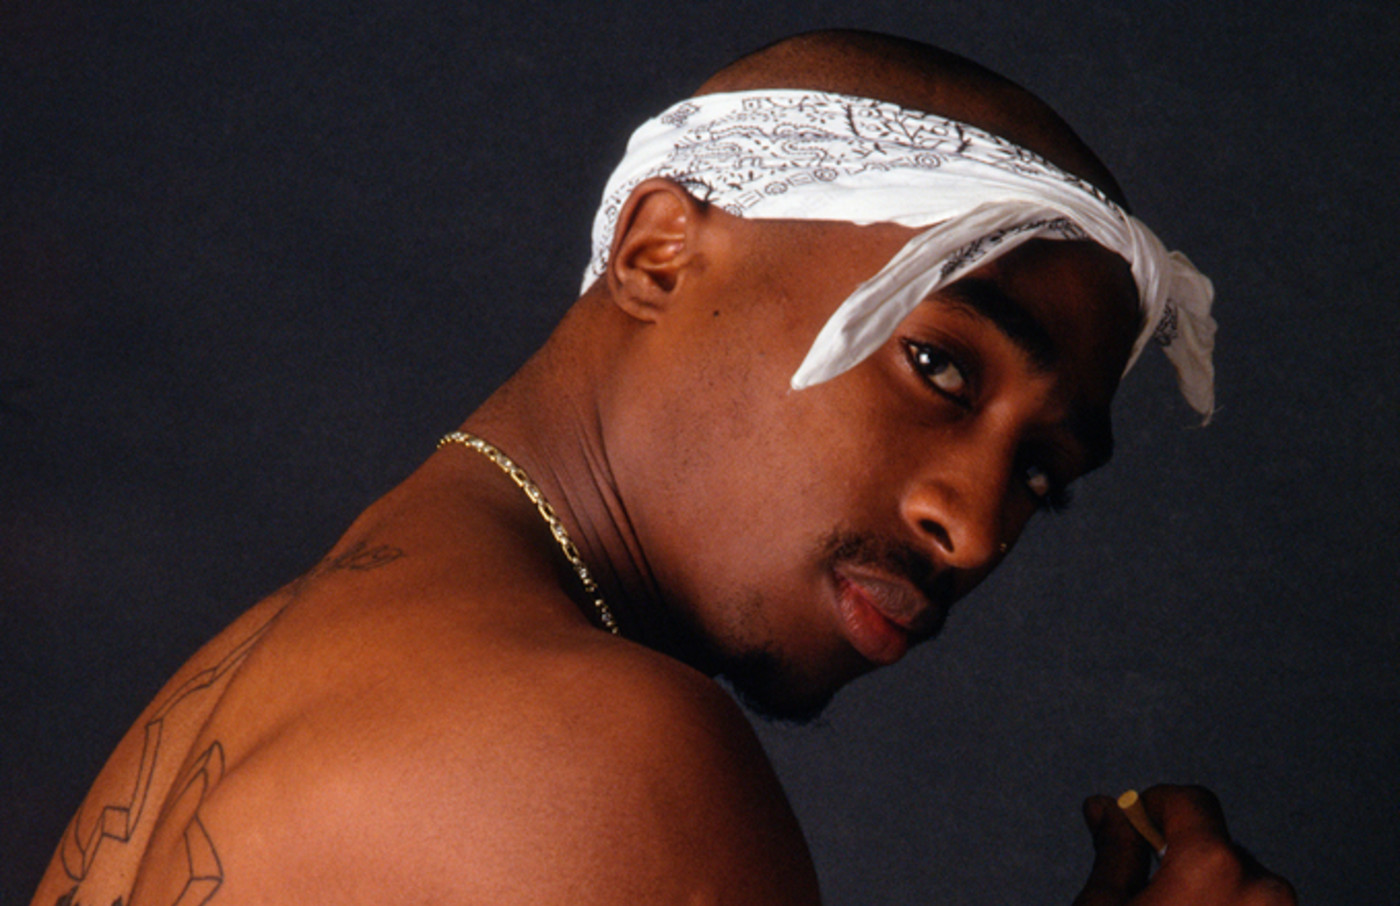 brooklyn-based-auction-house-2pac-s-family-estate-is-not-suing-us